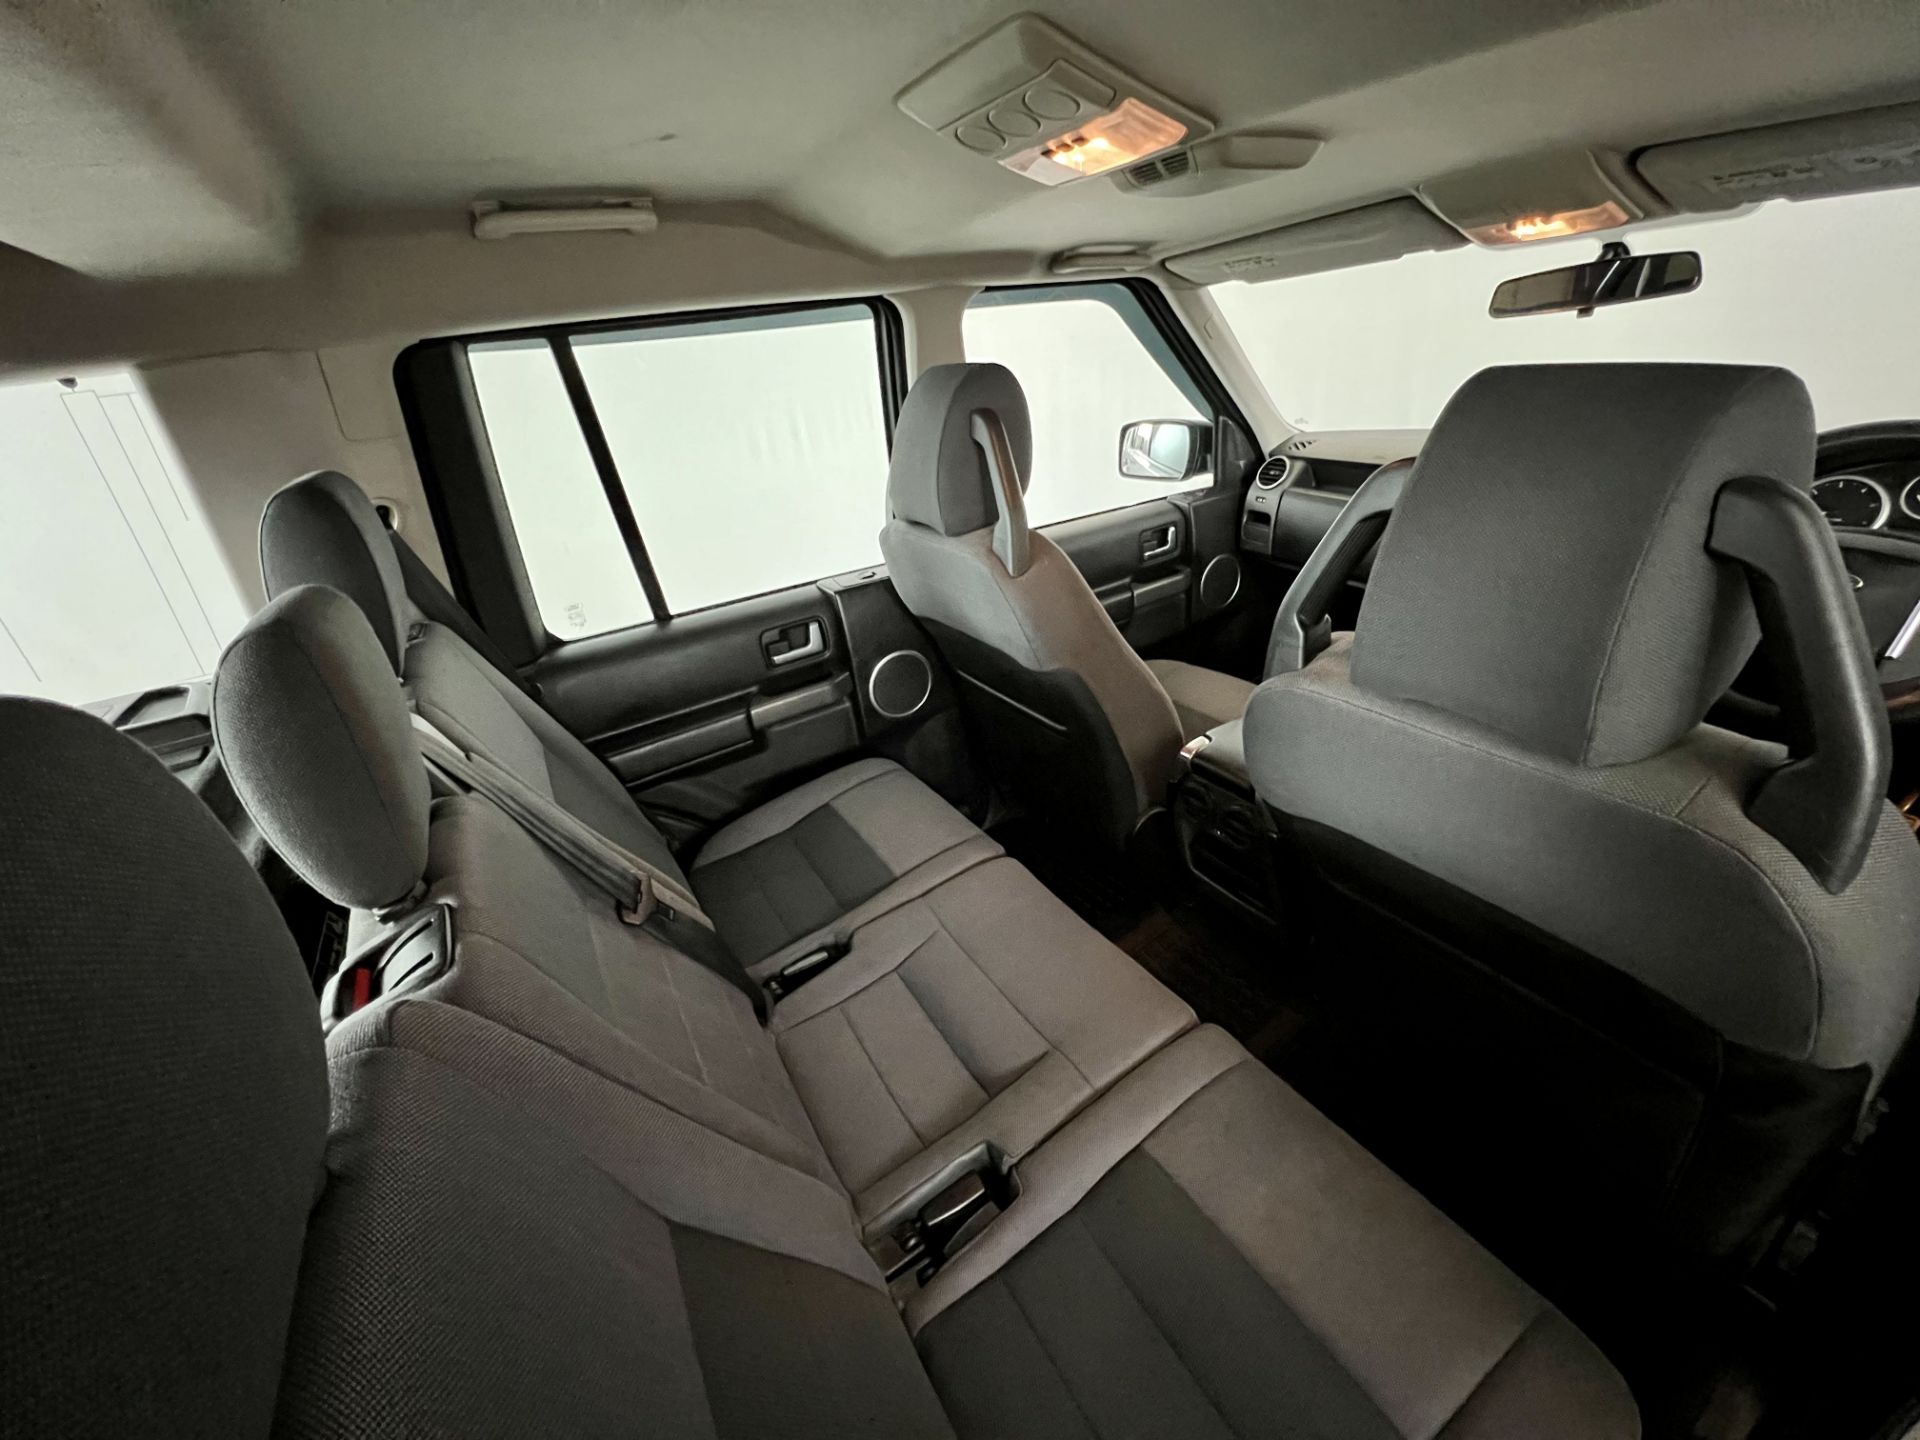 Land Rover Discovery - Image 22 of 34